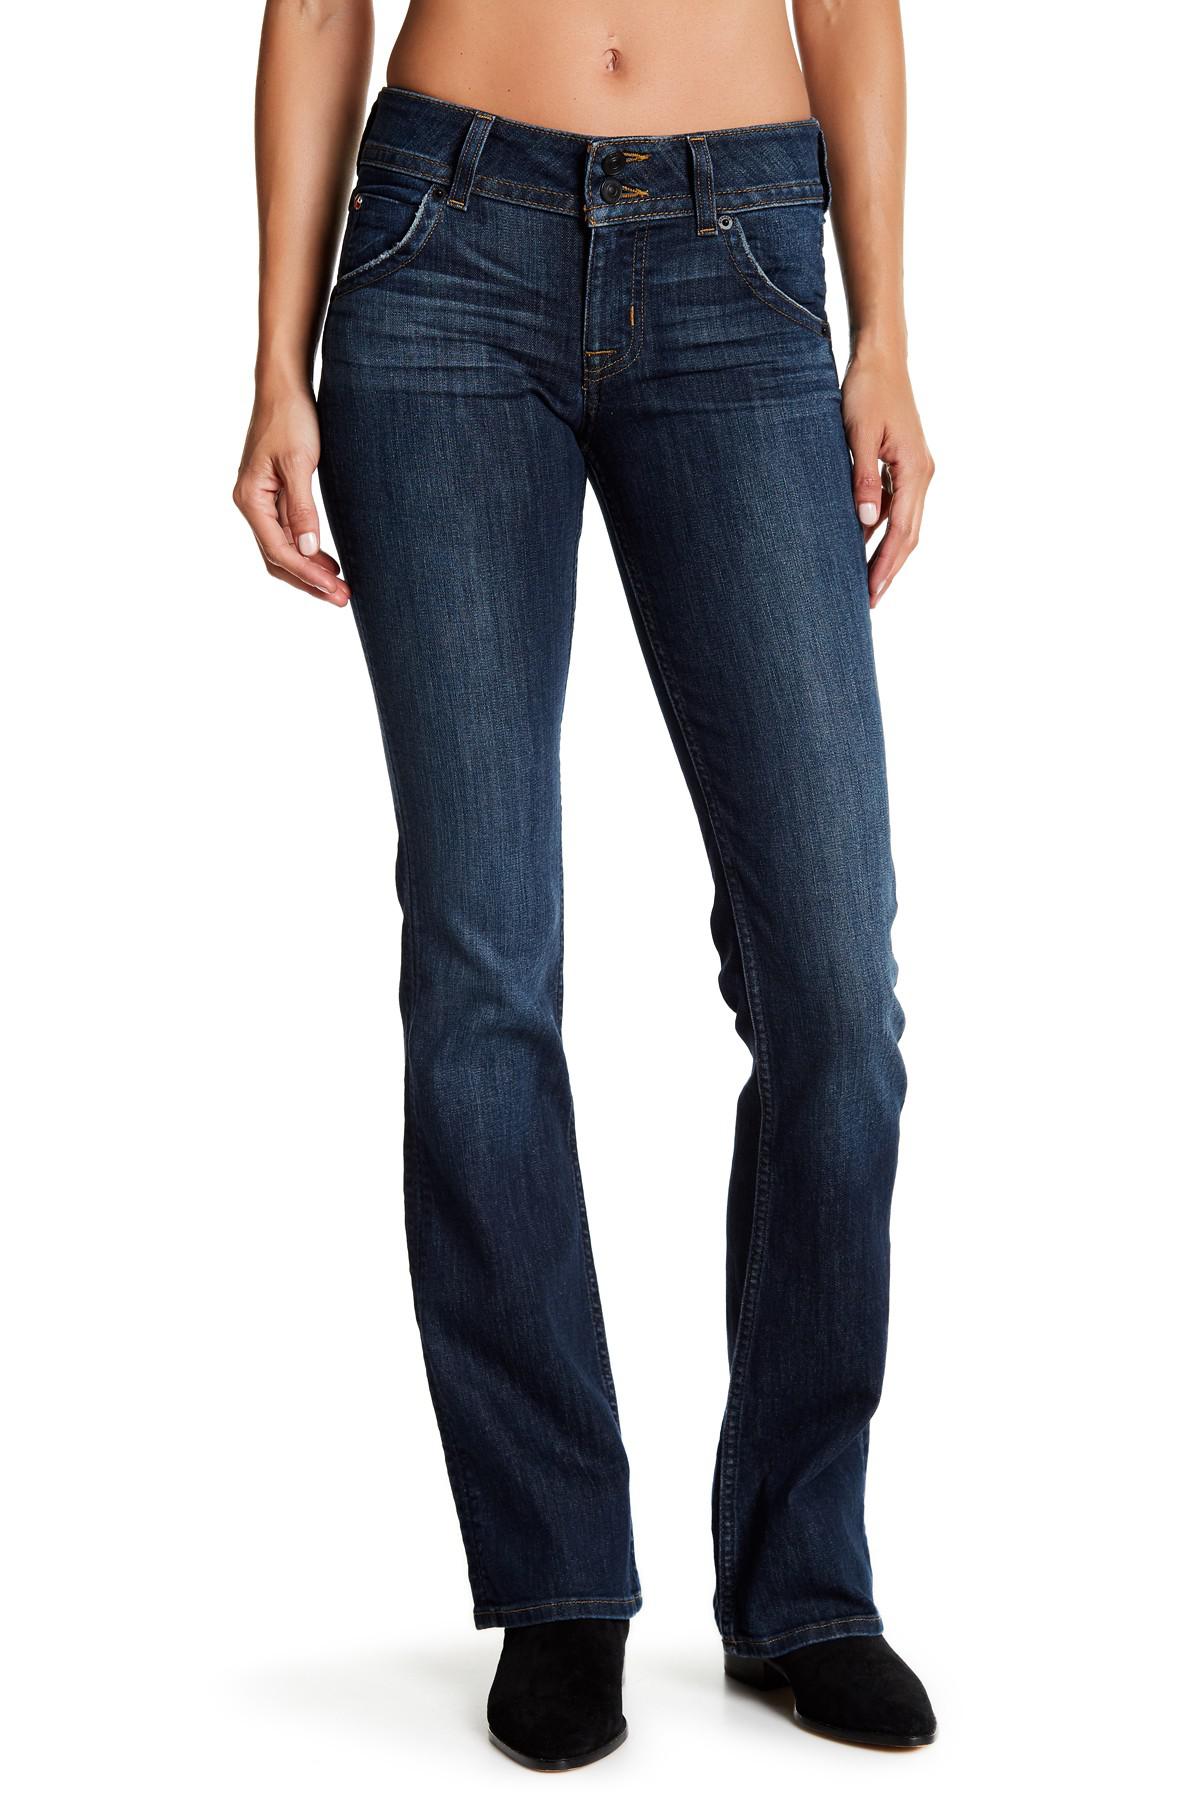 Lyst - Hudson Signature Bootcut Mid Rise Jean in Blue